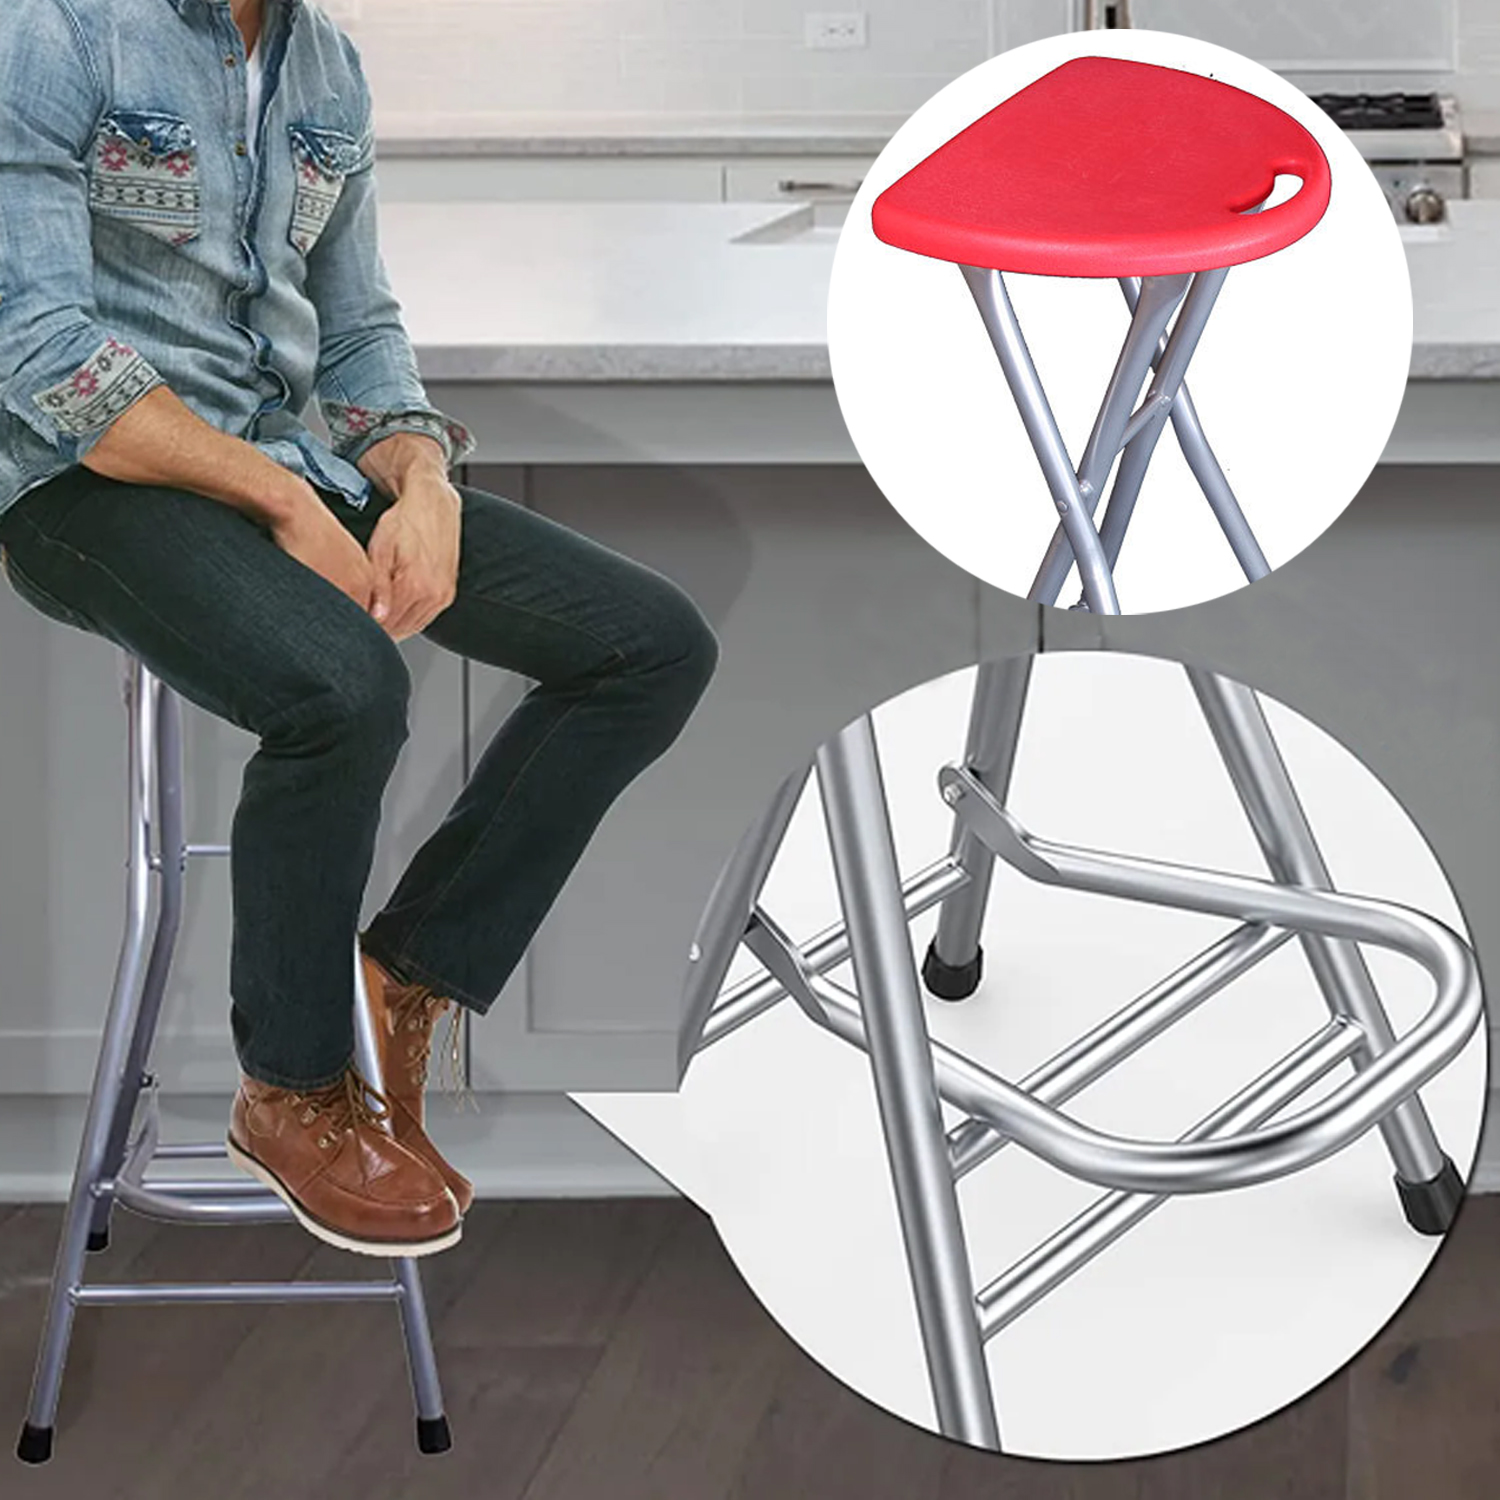 Portable Folding Stools for Adults Sturdy Folding Stool High Bar Stool with Handle Plastic Counter Stool for Kitchen And Outdoor